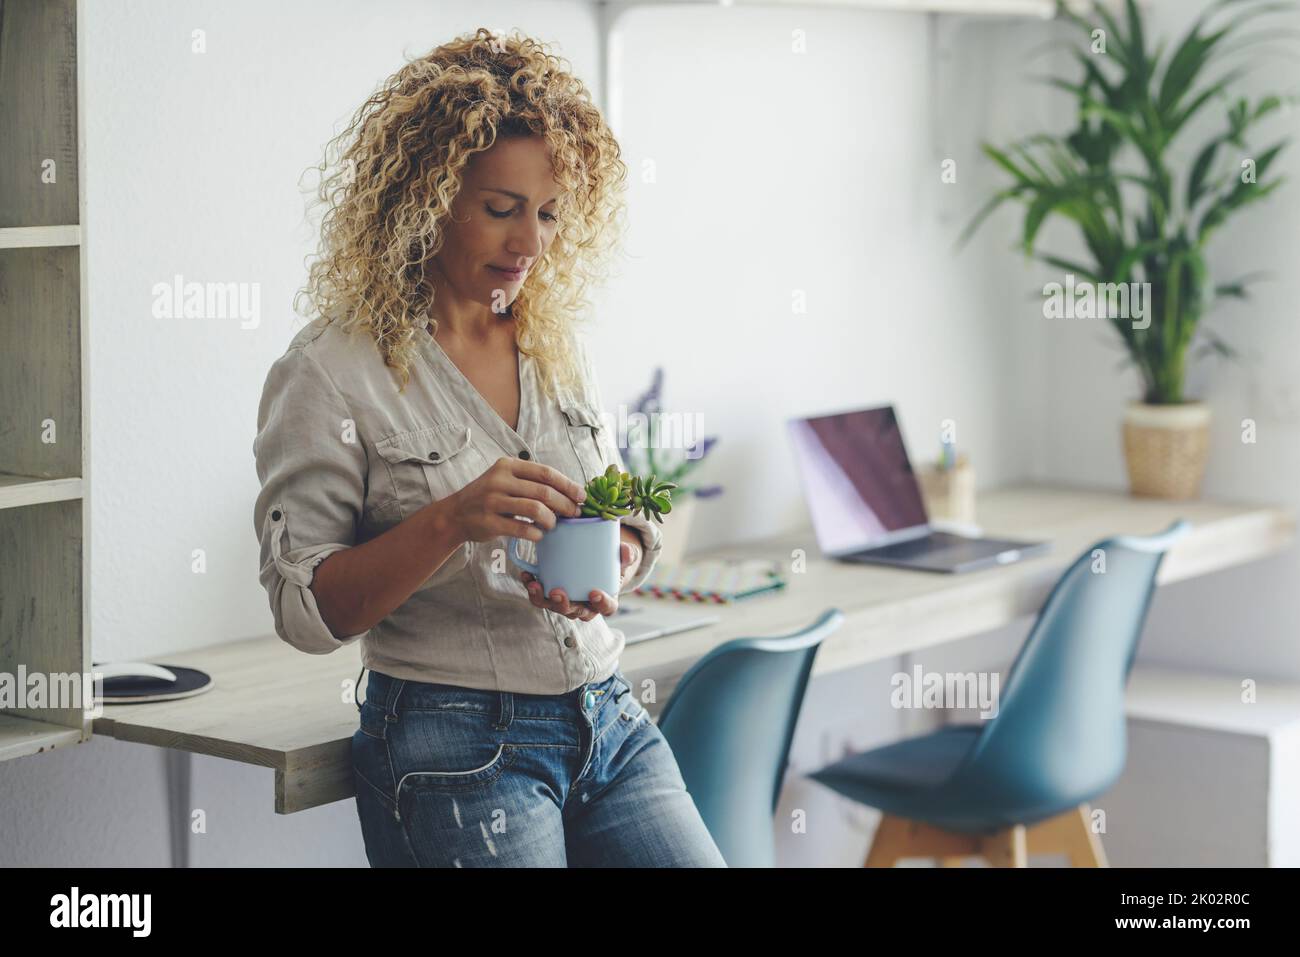 Pretty young mature lady woman enjoy indoor leisure activity at home standing and caring a plant. Laptop computer in background as alternative office workstation. Modern cute lady in casual wear smile Stock Photo